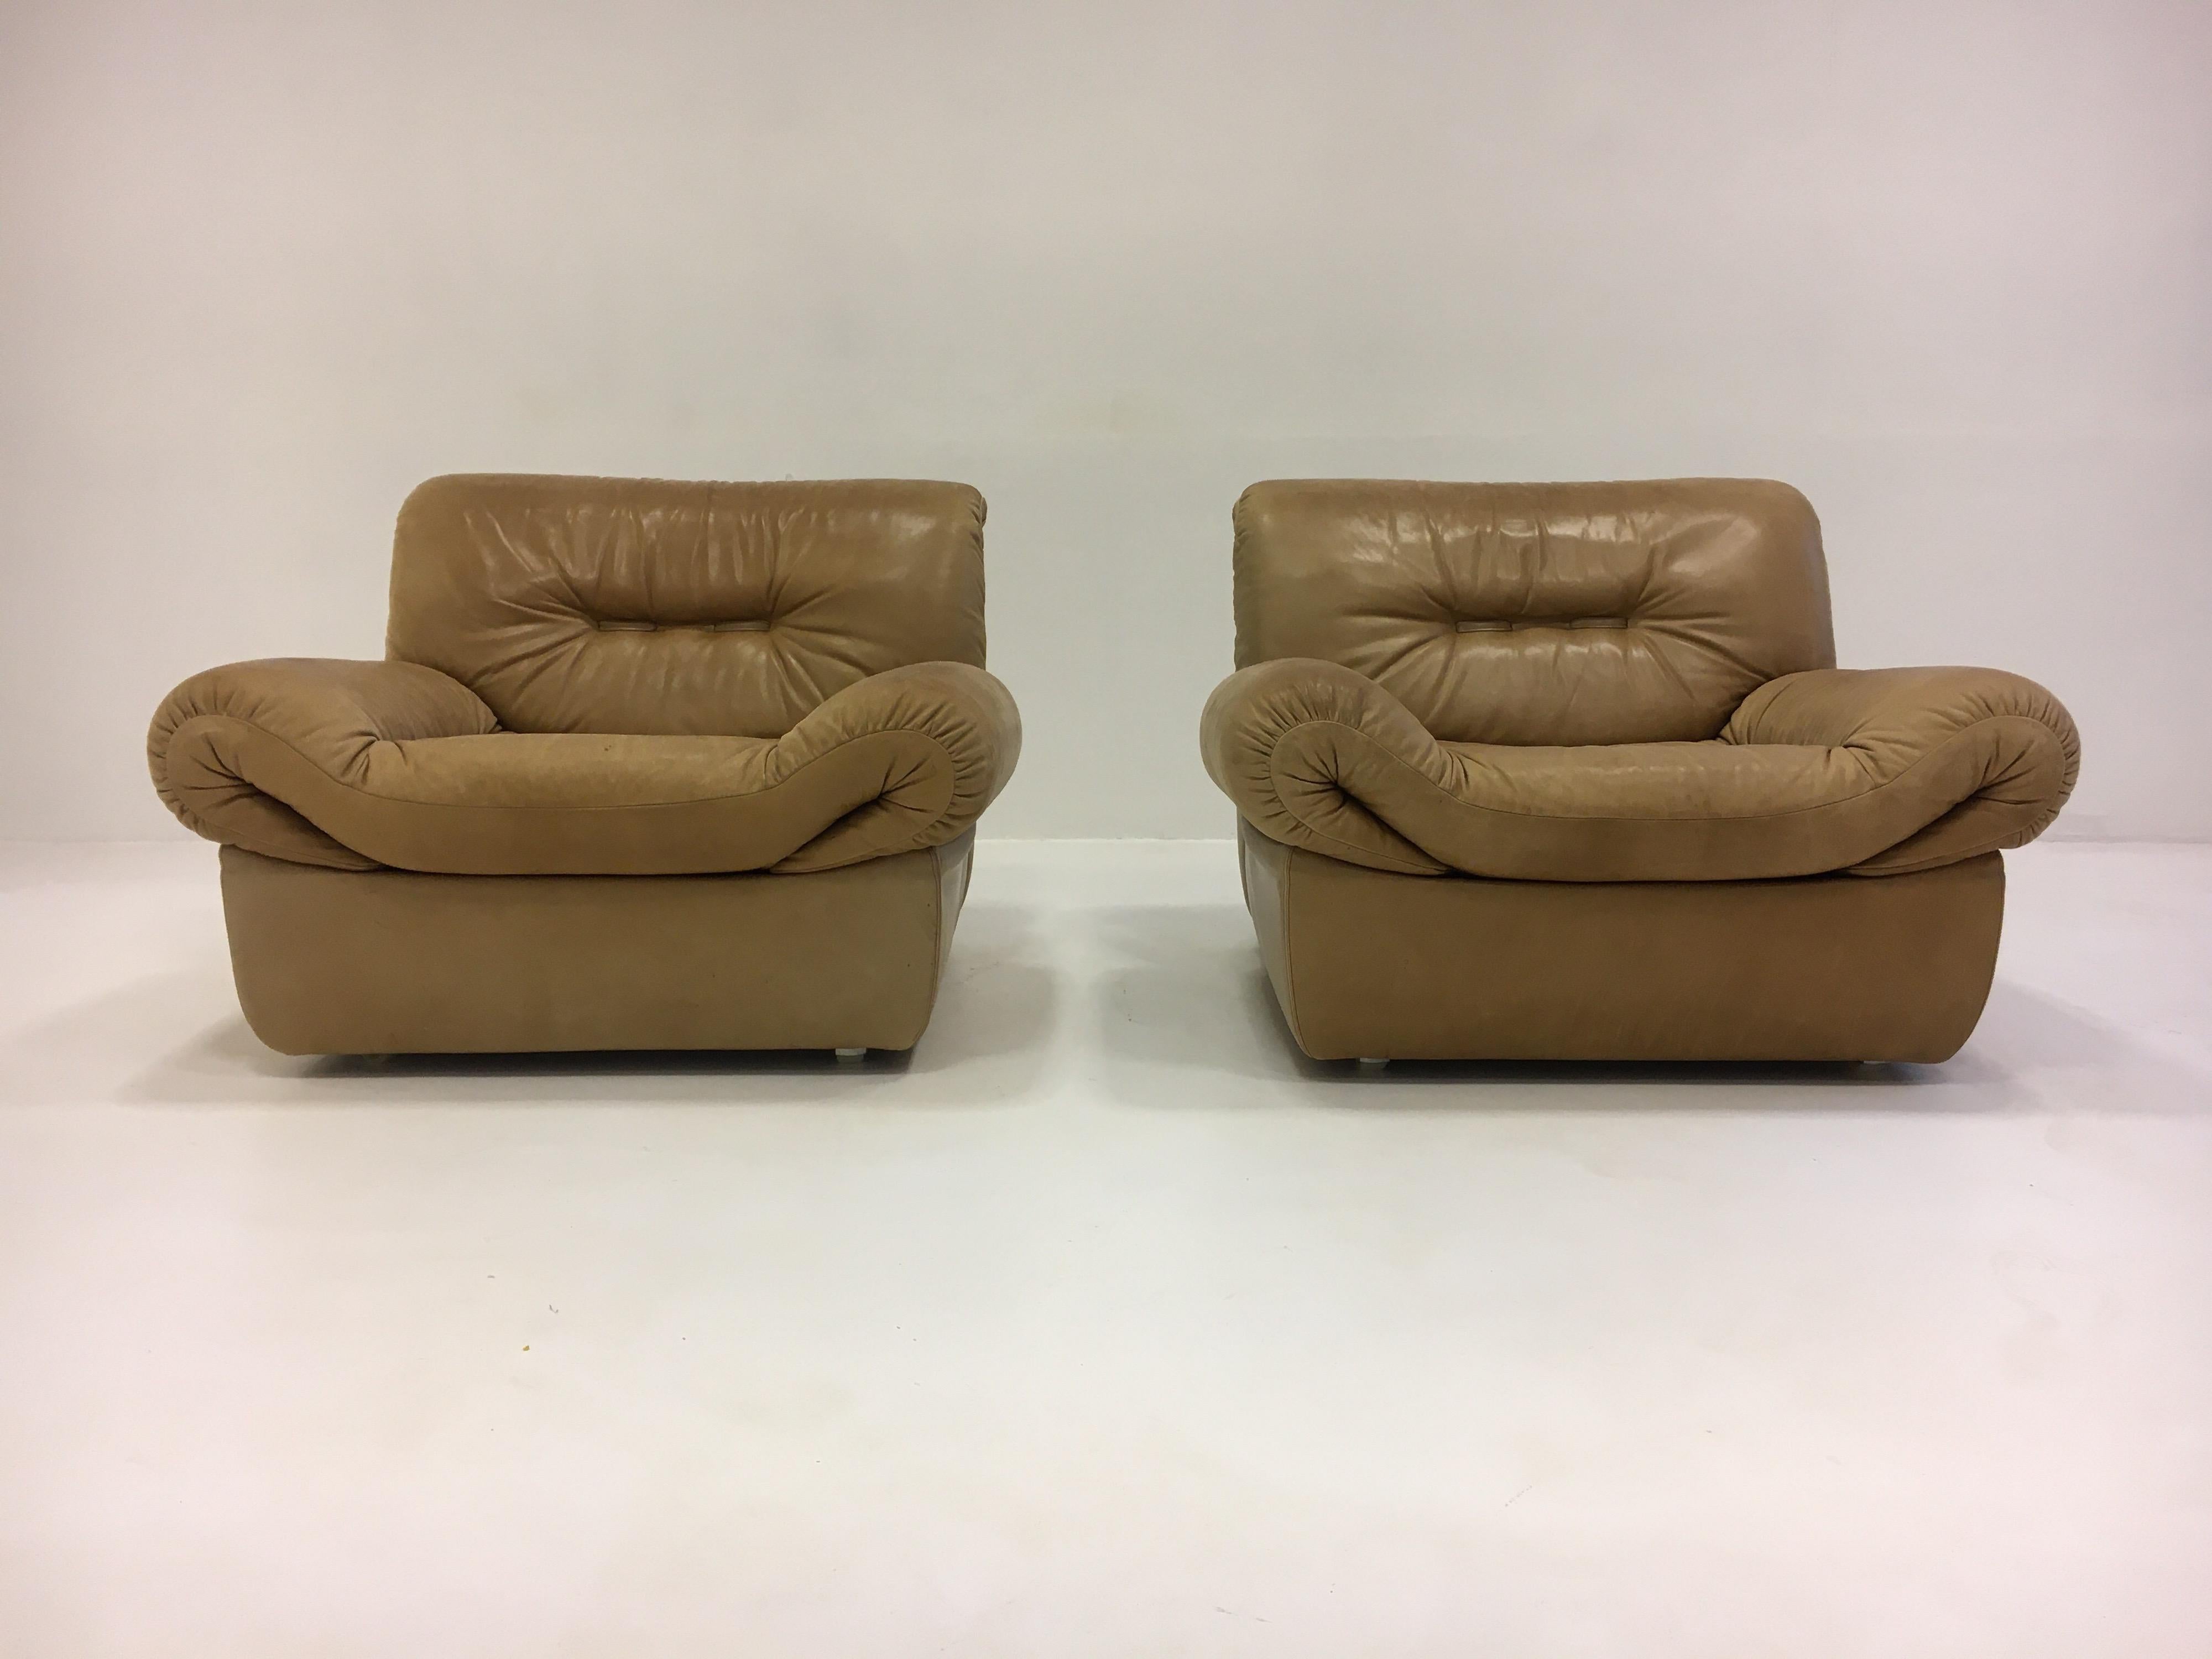 Wittmann, Model 'Chairman' pair of lounge chairs, patinated cognac leather, Austria 1970s. Designed by Bruno Egger in 1971.